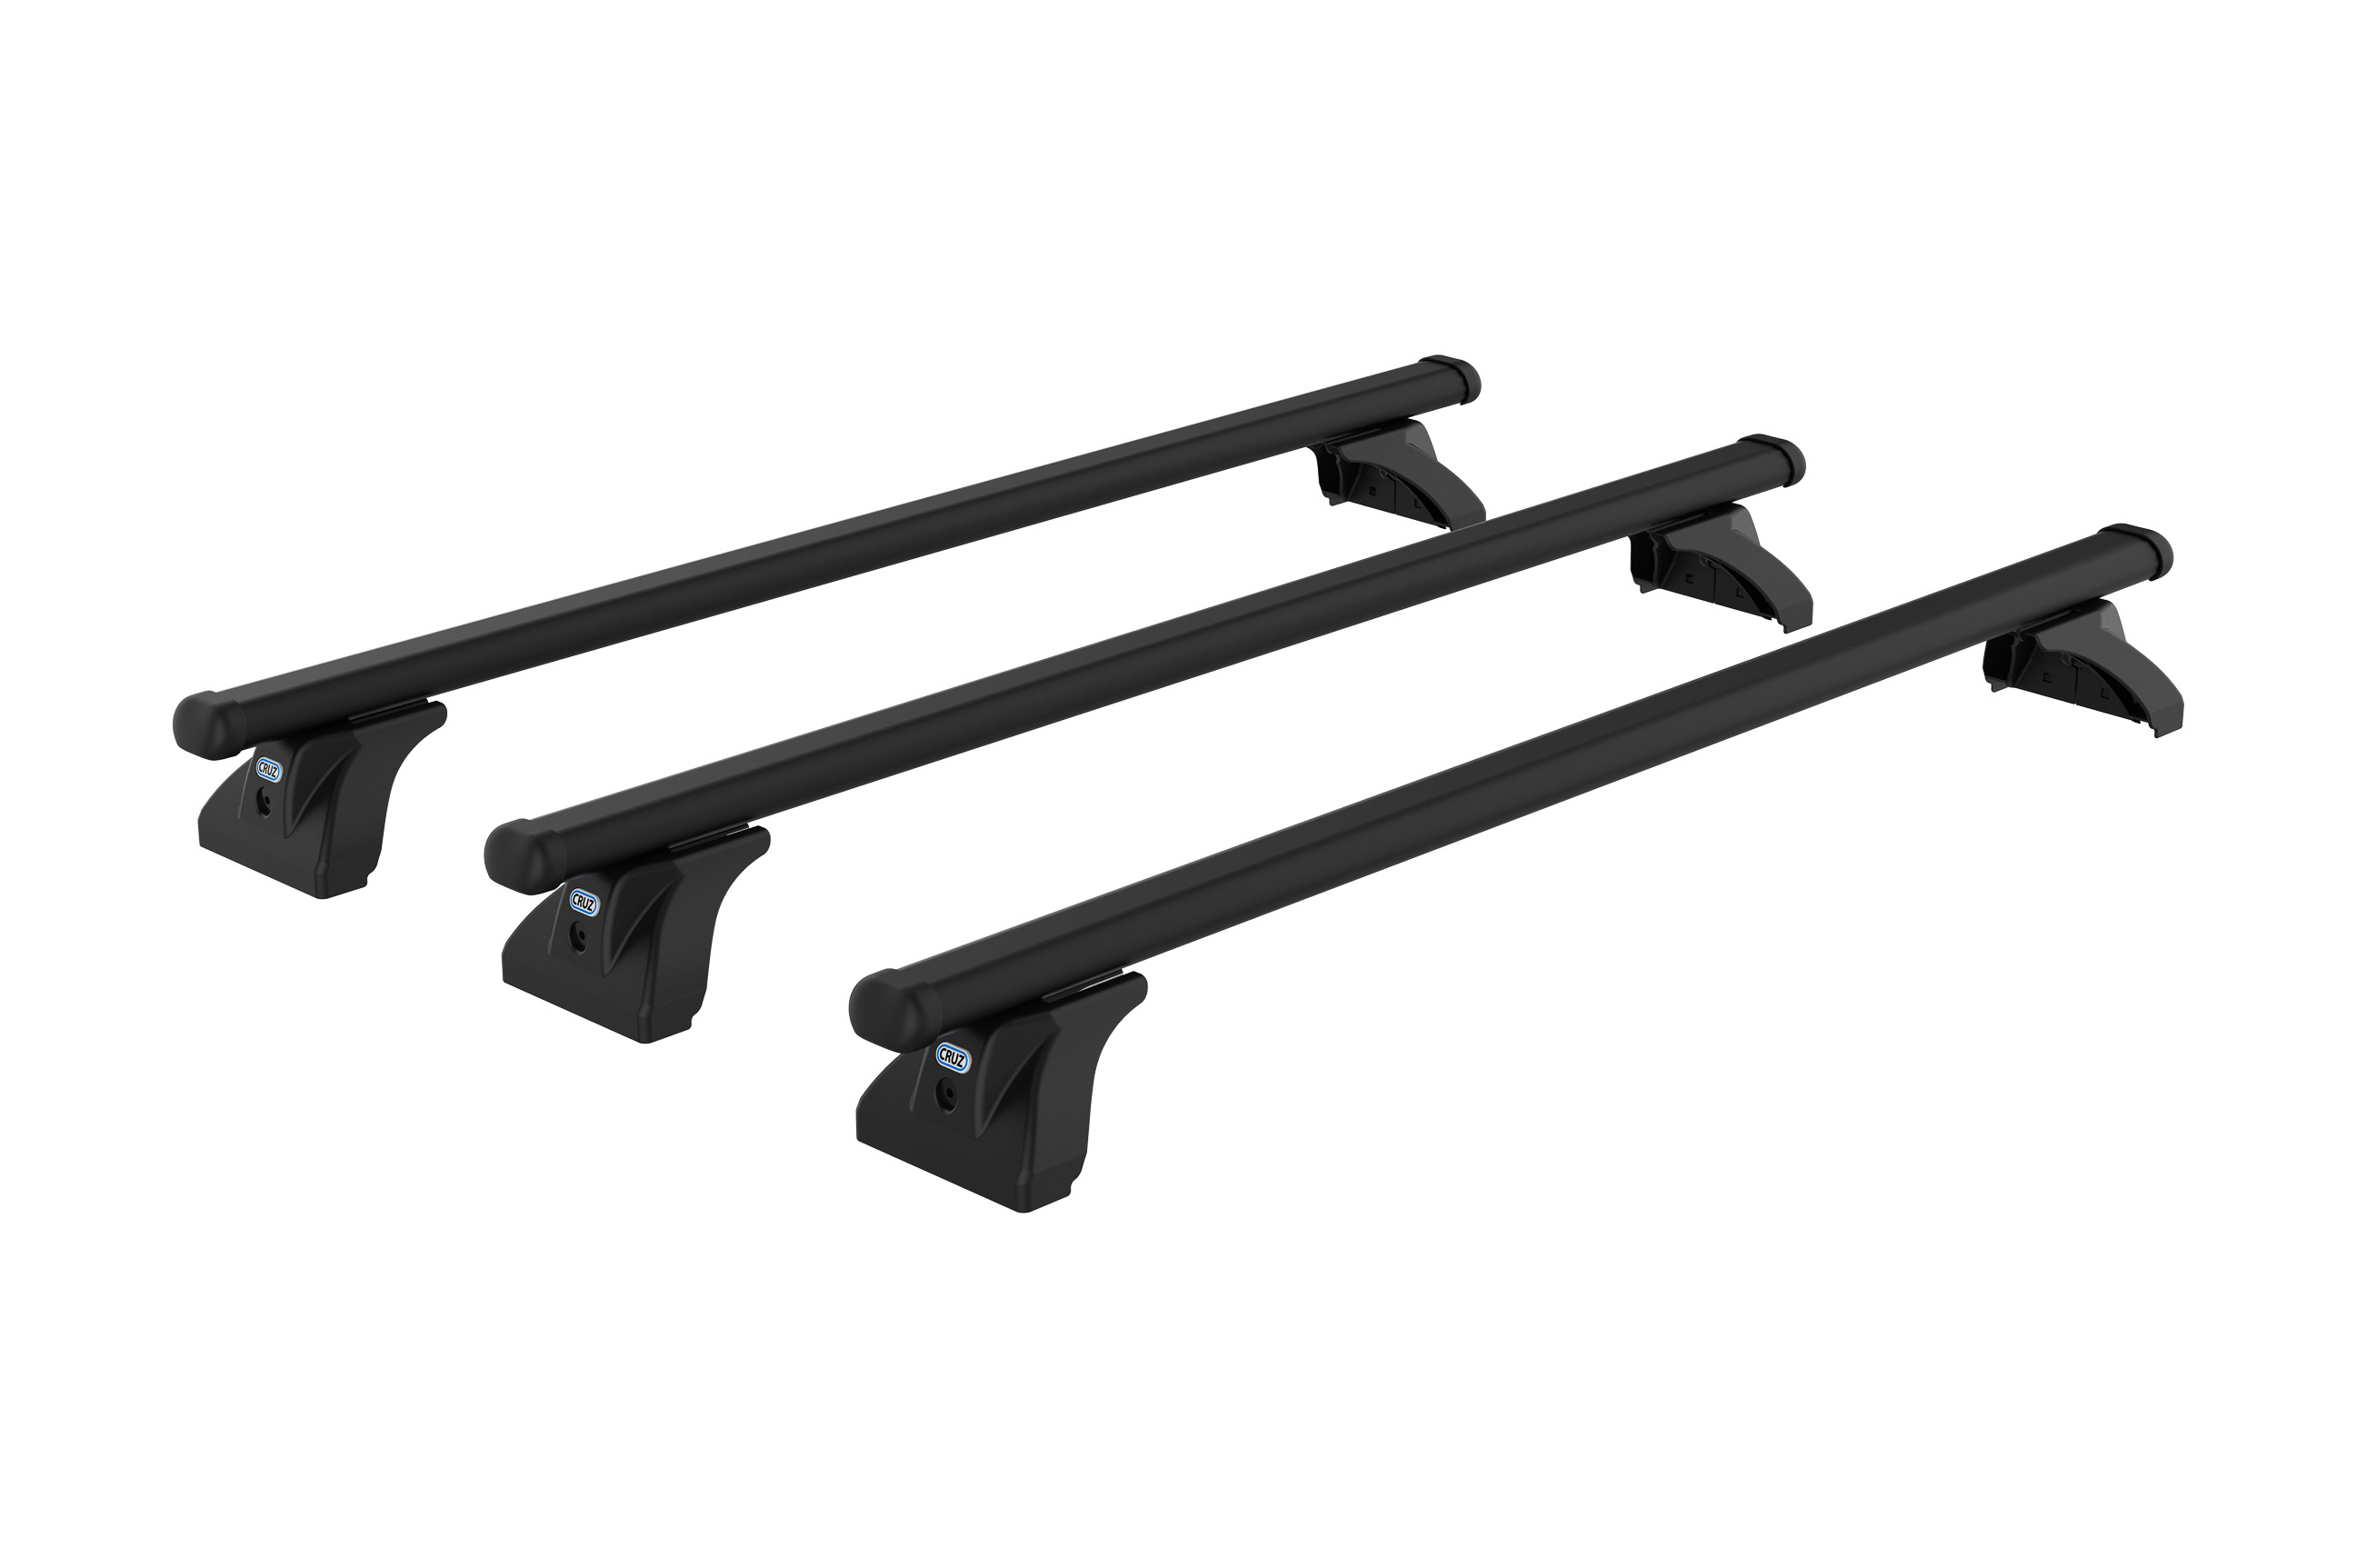 Vauxhall Combo L2 (LWB) H1 (low roof) (2012 to 2018):CRUZ 3 bar Cargo Xpro SF steel roof bar system